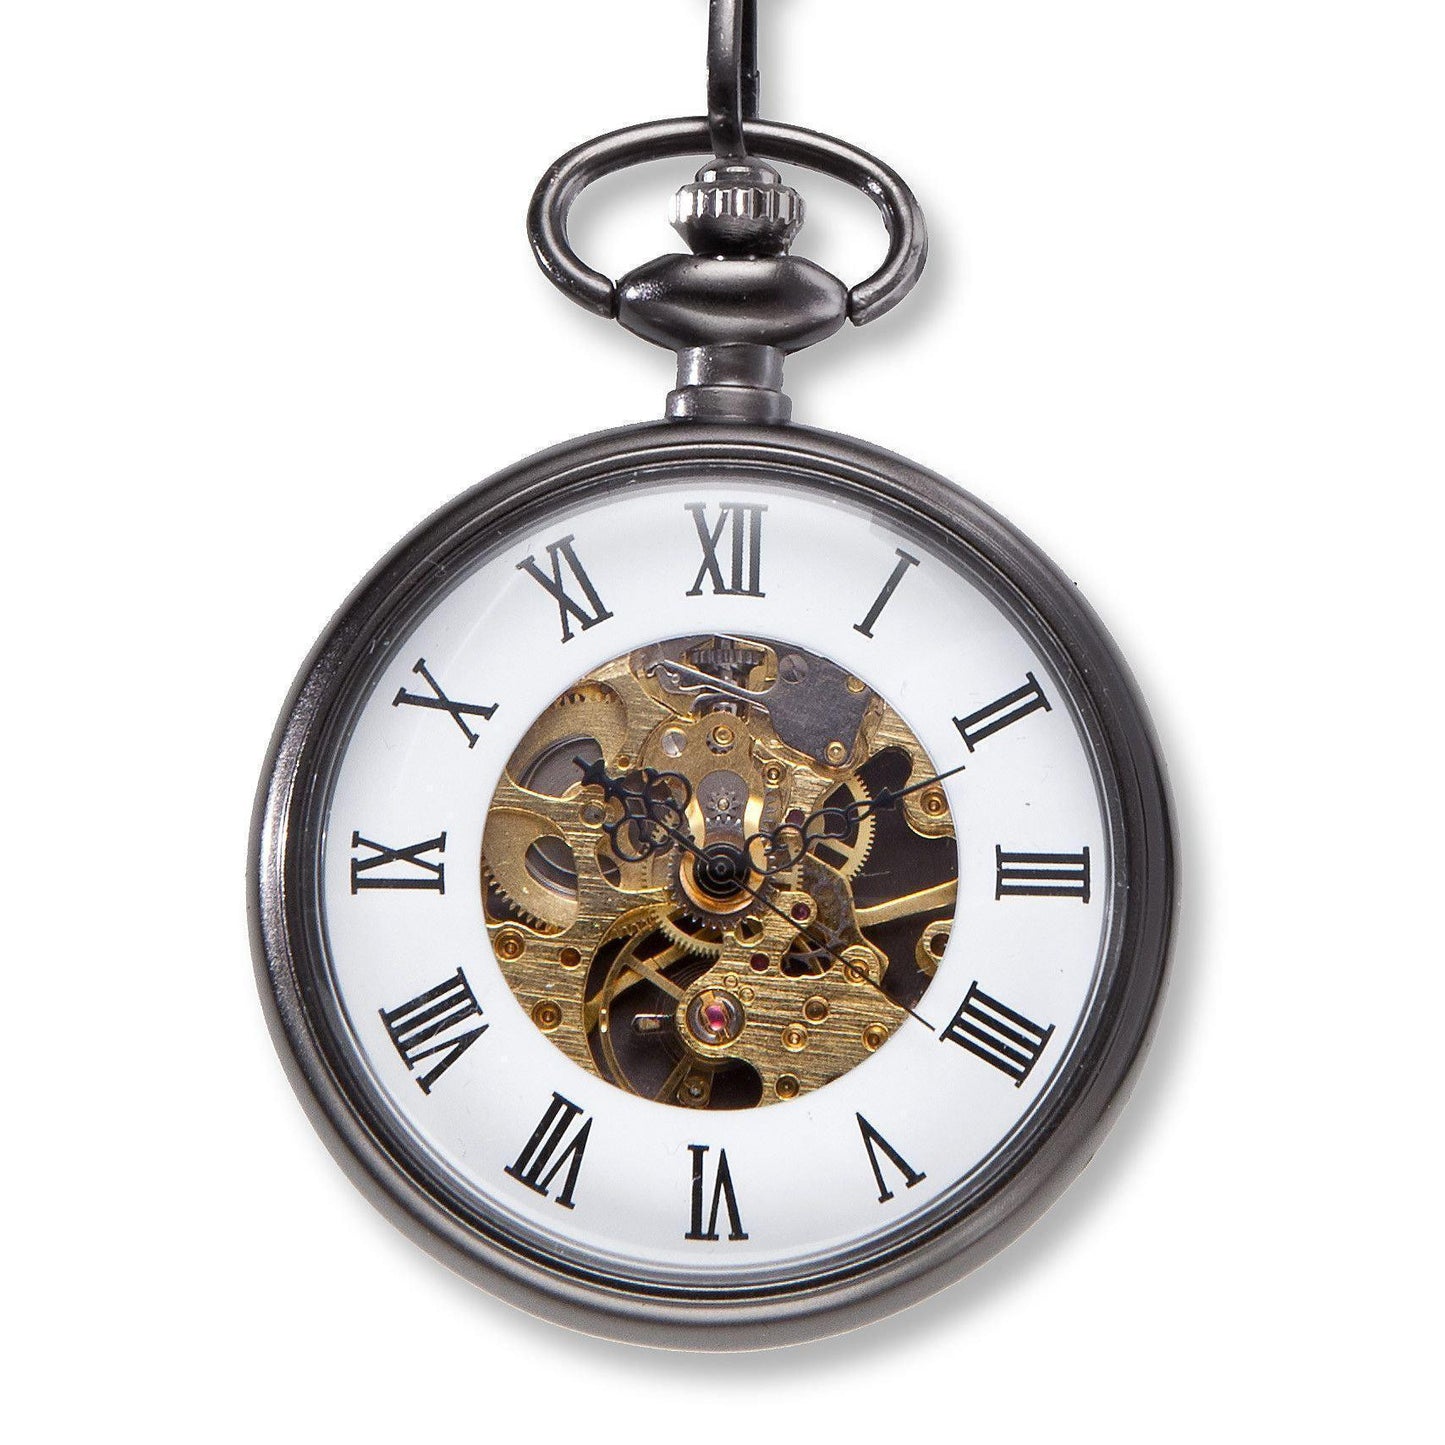 Dad Lucky To Have You Engraved Pocket Watch